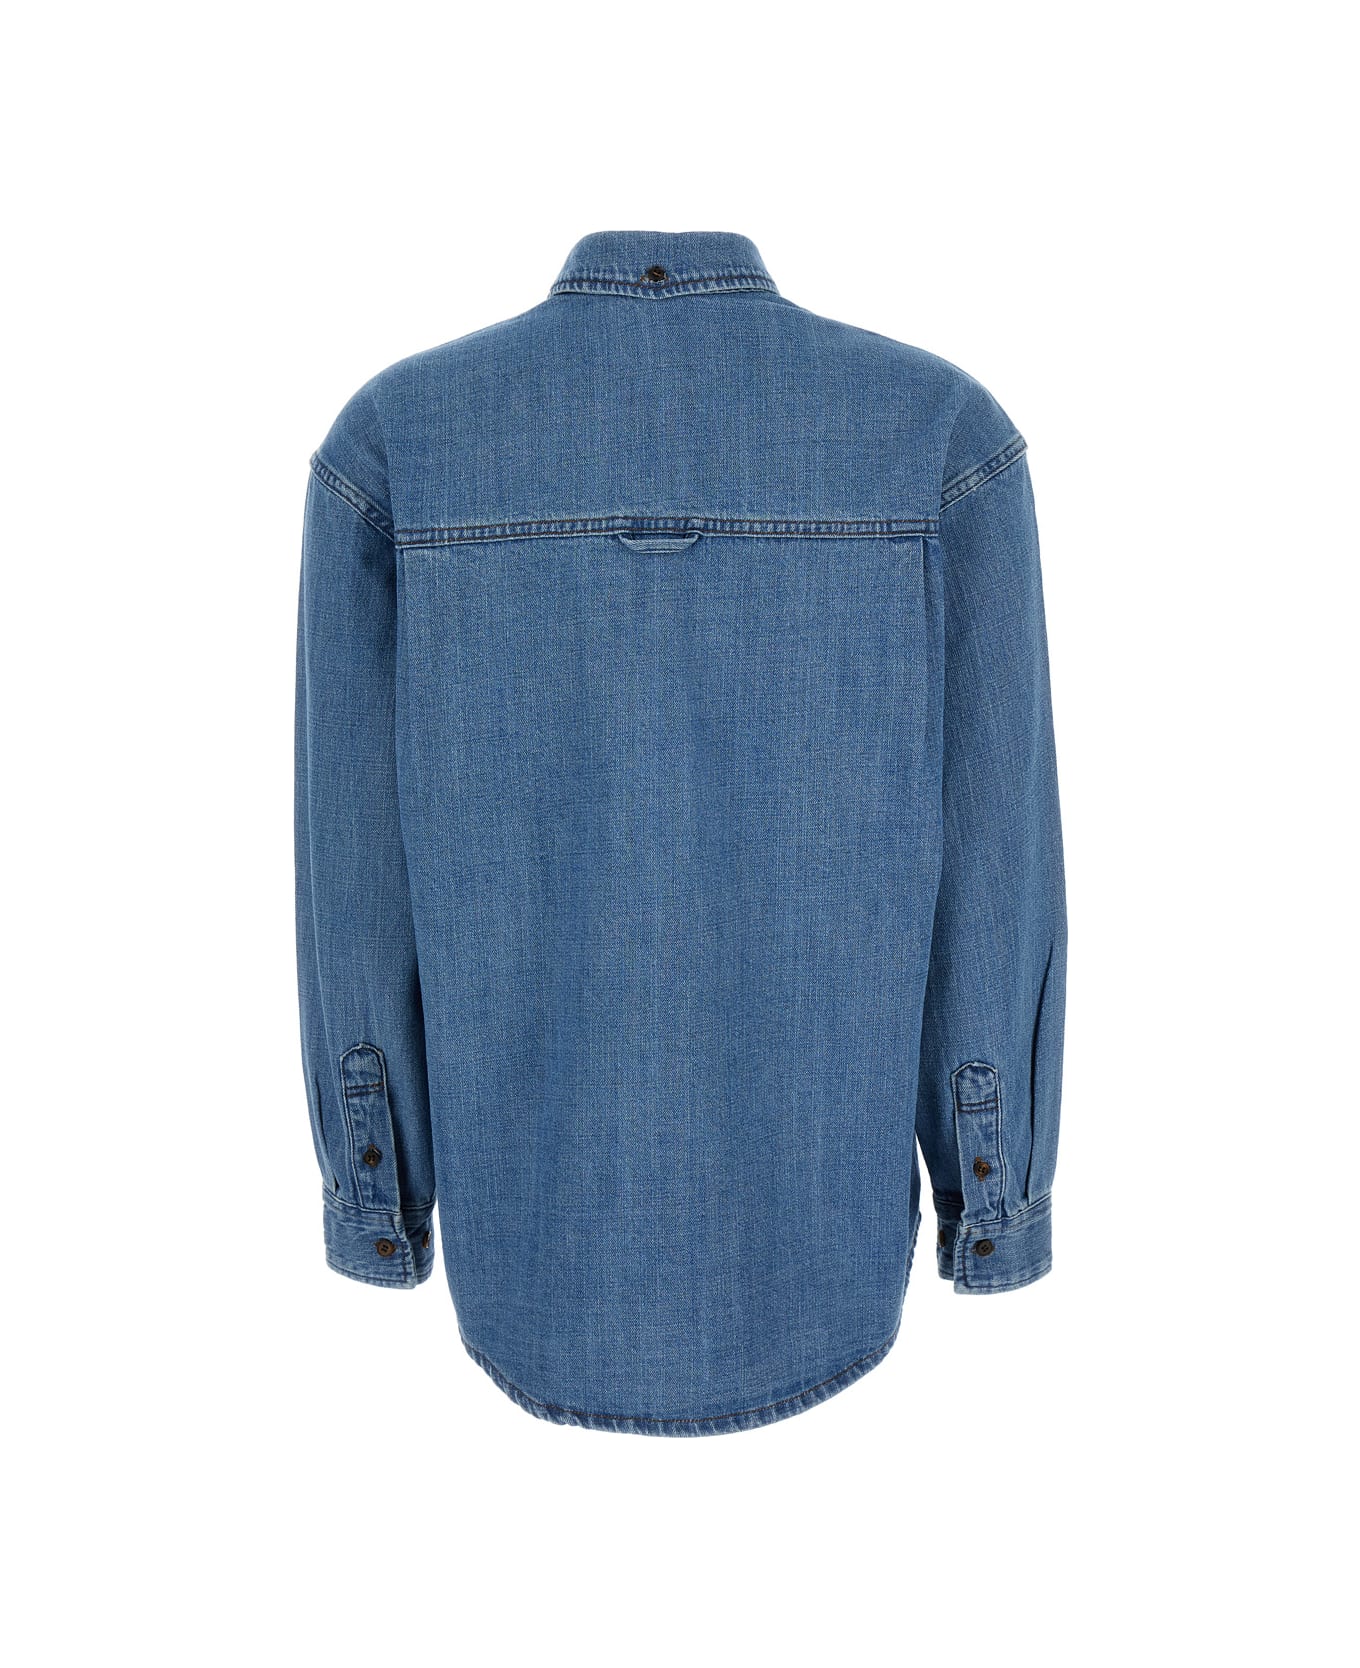 Dunst Blue Denim Shirt With Contrasting Stritching In Cotton Woman - Blu シャツ